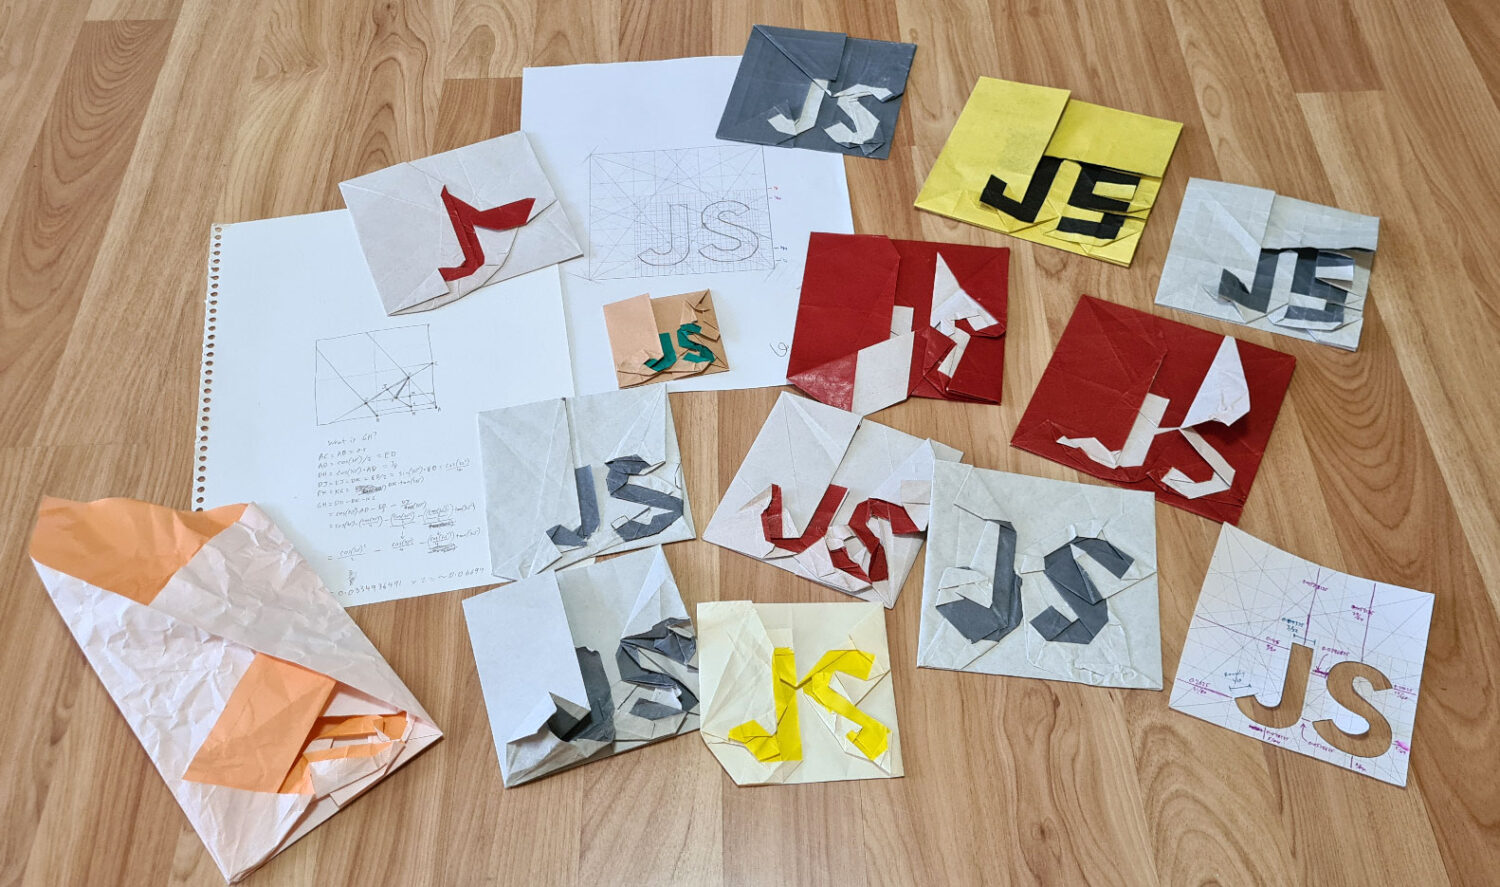 13 variations of origami JS logo attempts are scattered among printouts and sketches of shapes. Most of the models are rough and out-of-proportion. Some are only half folded.